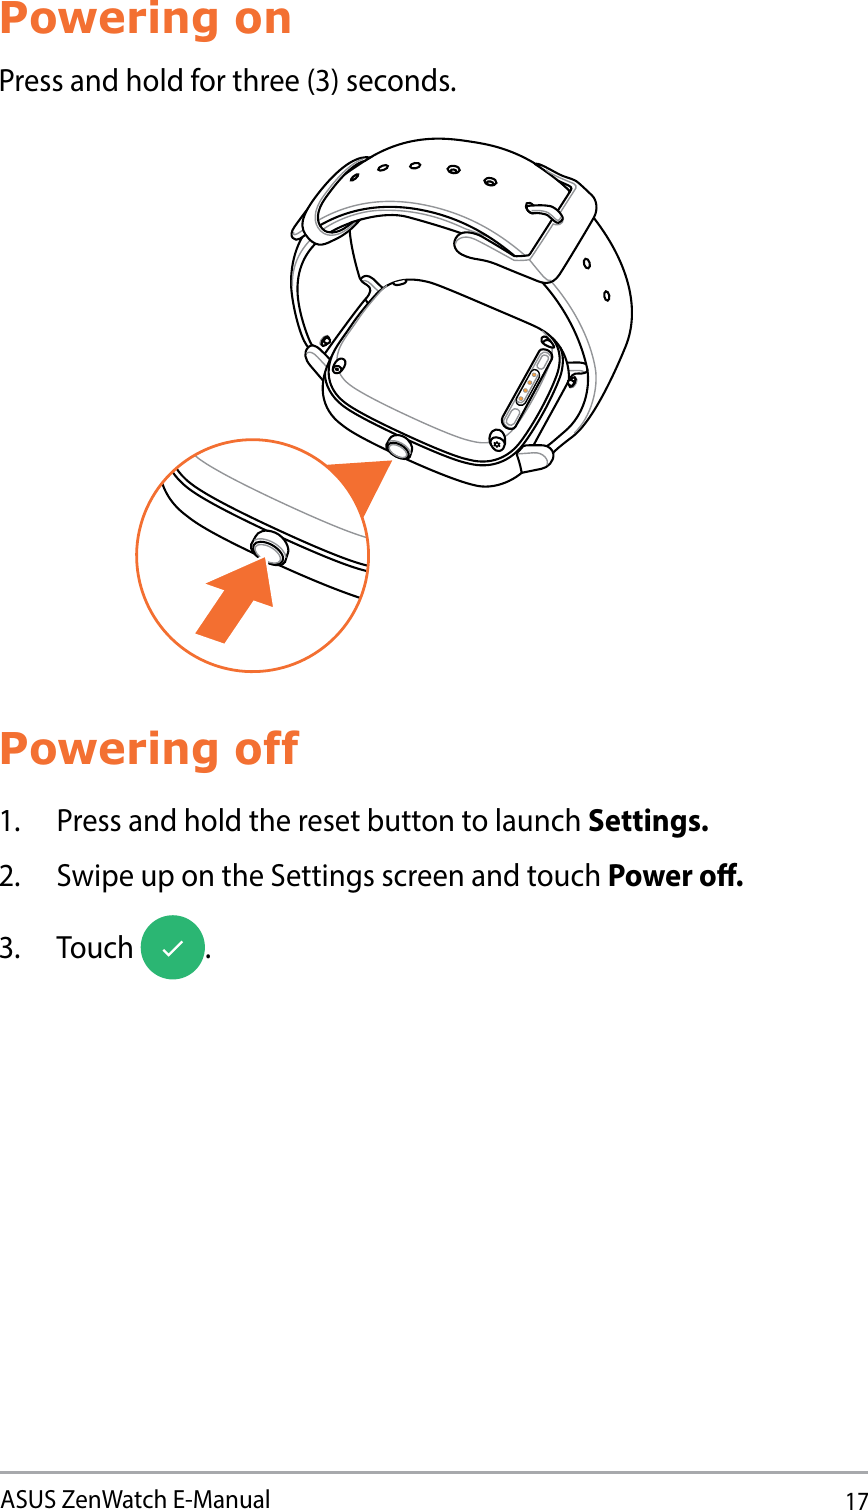 17ASUS ZenWatch E-ManualPowering onPress and hold for three (3) seconds.Powering off1.  Press and hold the reset button to launch Settings.2.  Swipe up on the Settings screen and touch Power o.3. Touch  .